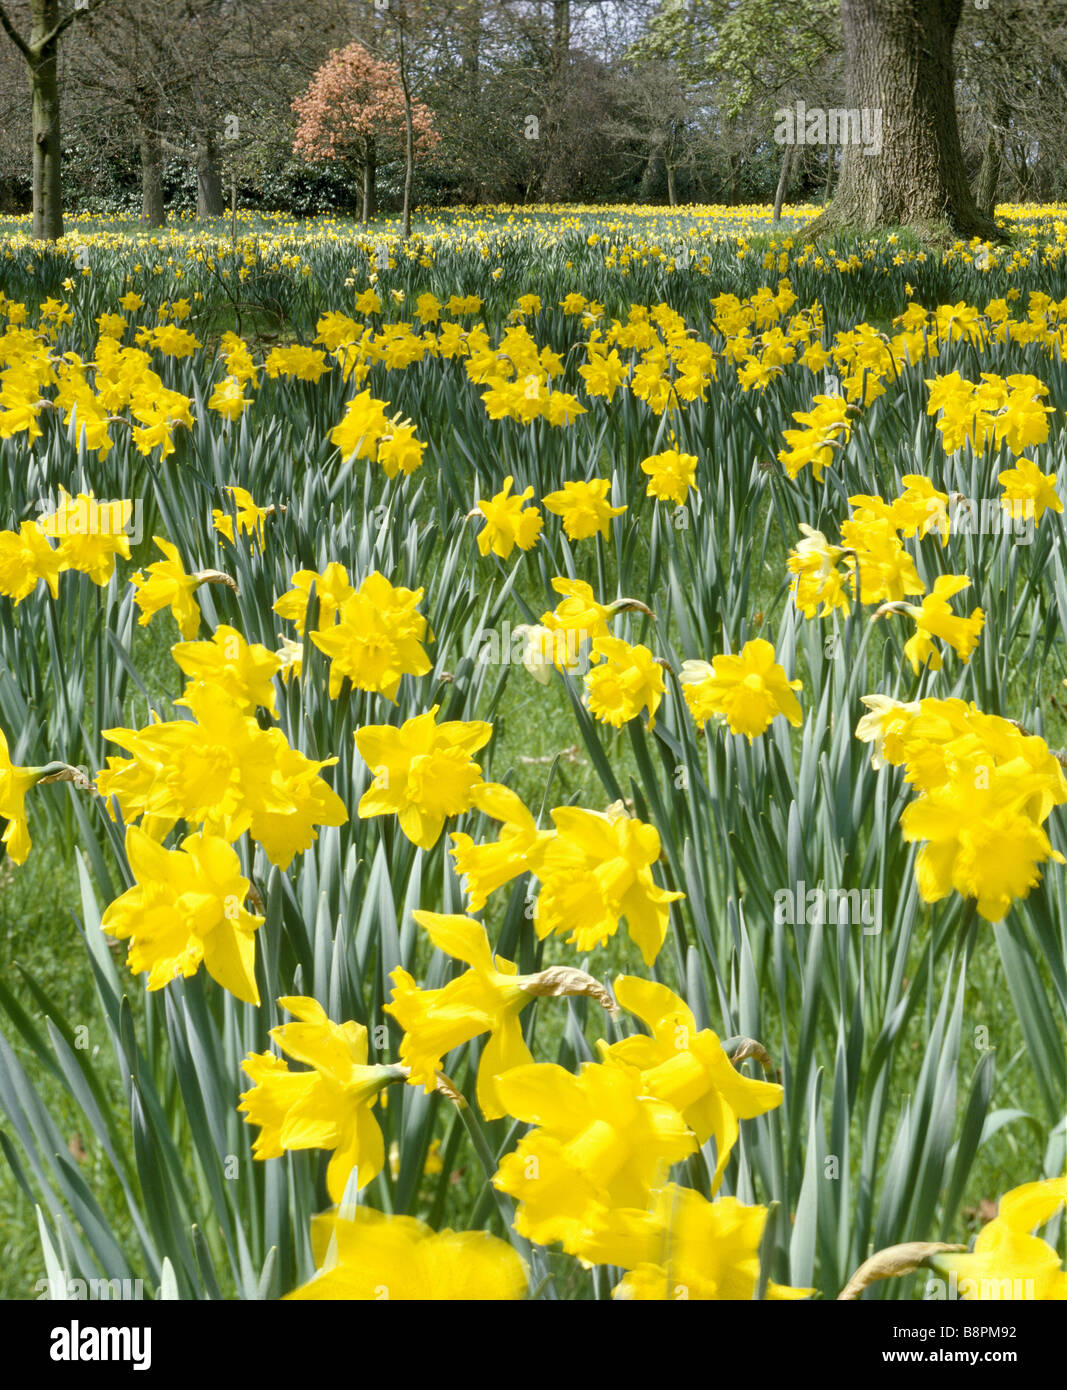 Bright spring daffodils in the garden at Ascott Stock Photo